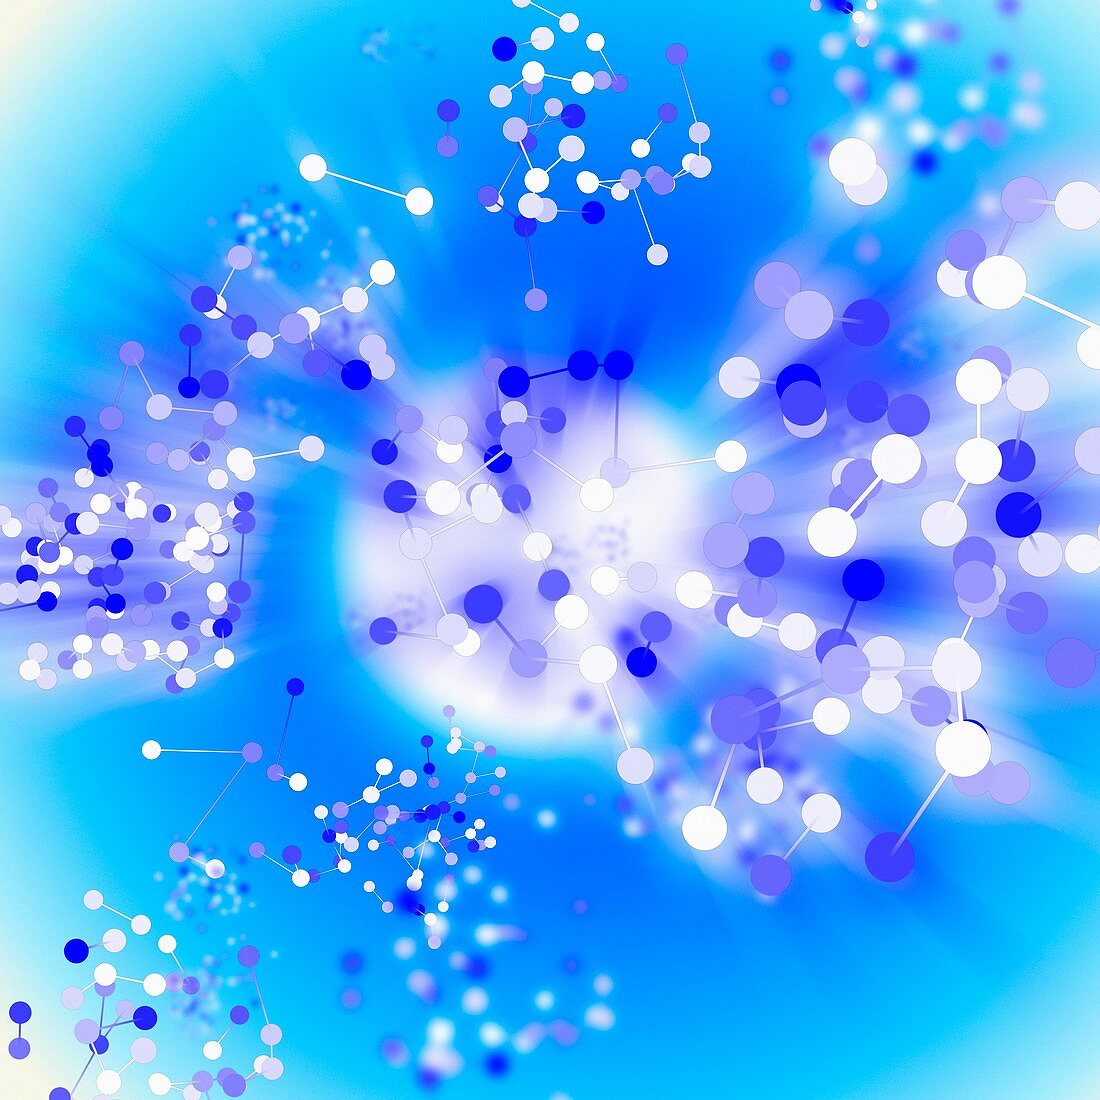 Blue and white molecules, illustration